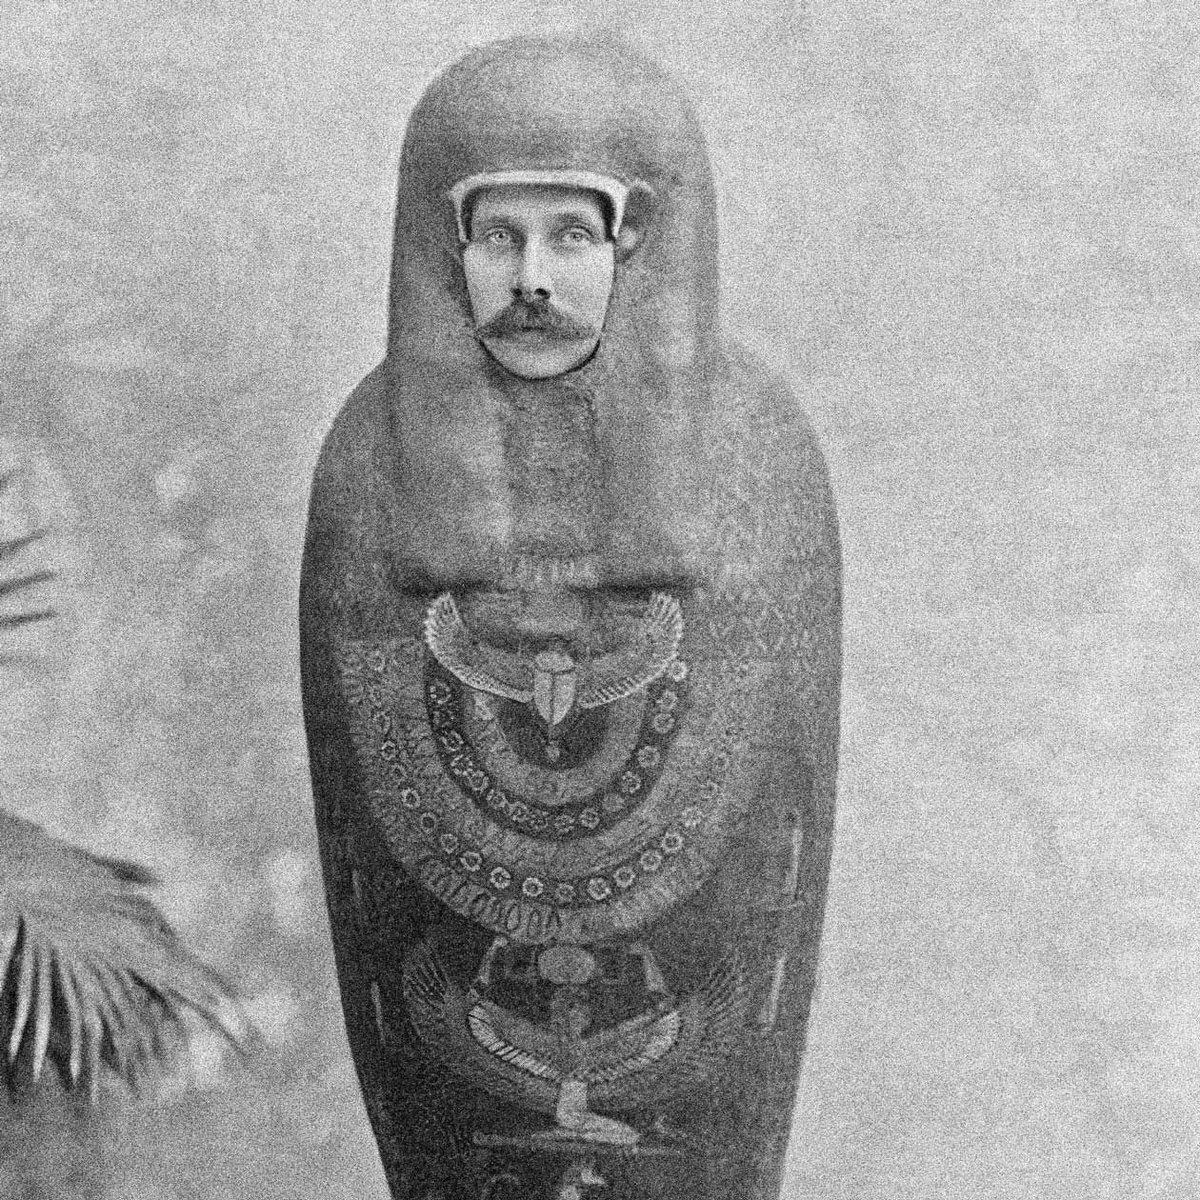 c. 1894: Austro-Hungarian archduke Franz Ferdinand dressed as a mummy _ For more pictures like this, follow @retronauthome @retronauthq